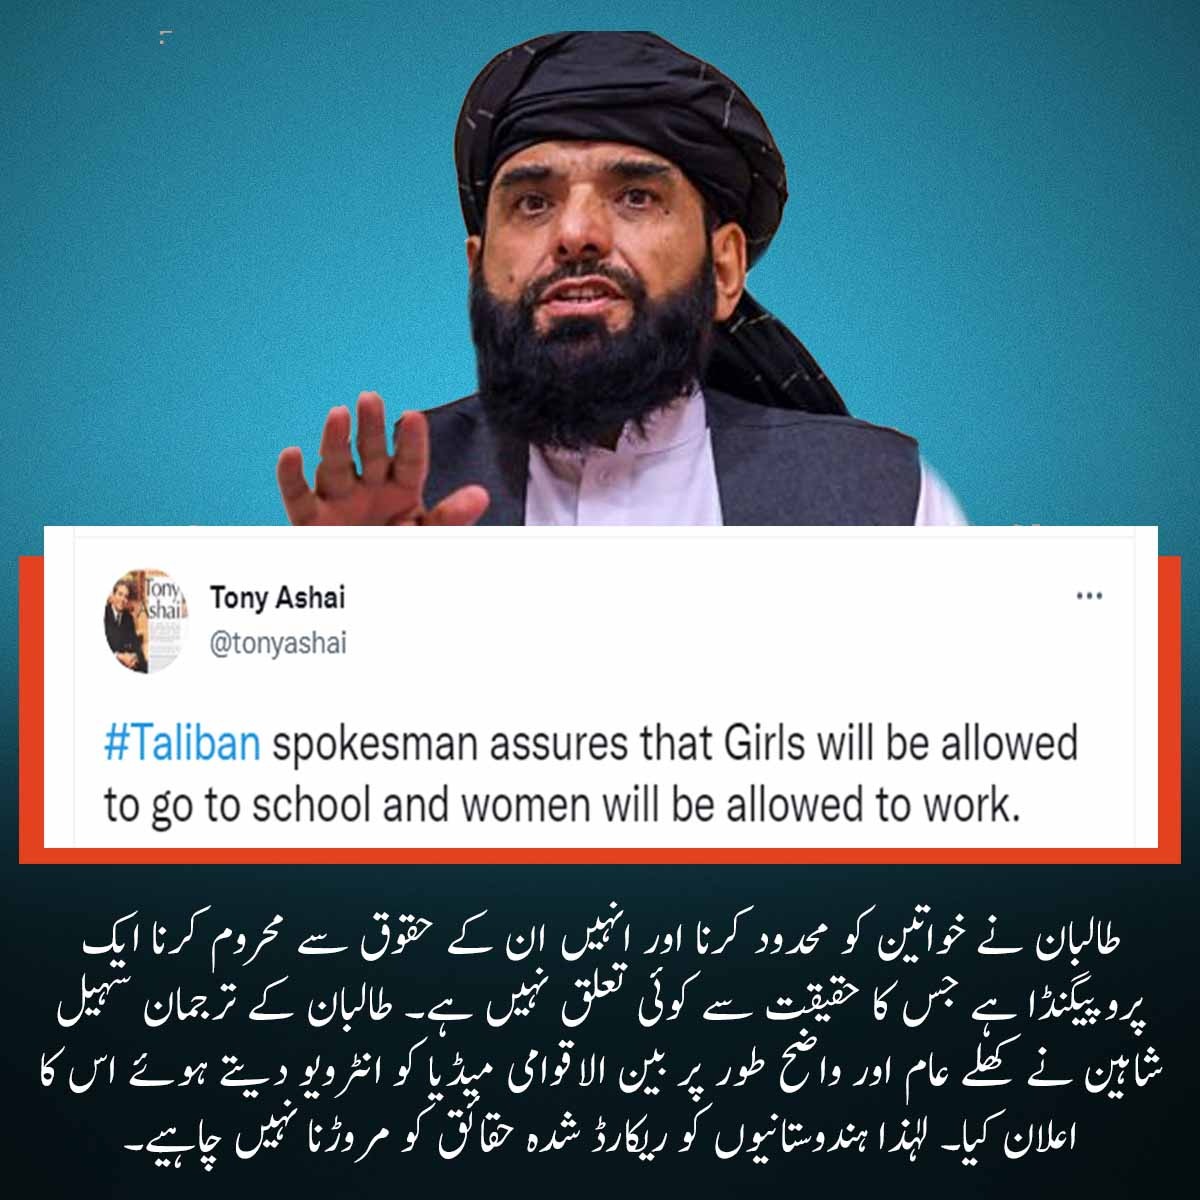 #WorryAboutIndiaNotAfg
India as it is master of fake news and reports spreading fake news that Taliban has banned Girls education 
Now it is for the whole world to read this 
@JoinTeamISP